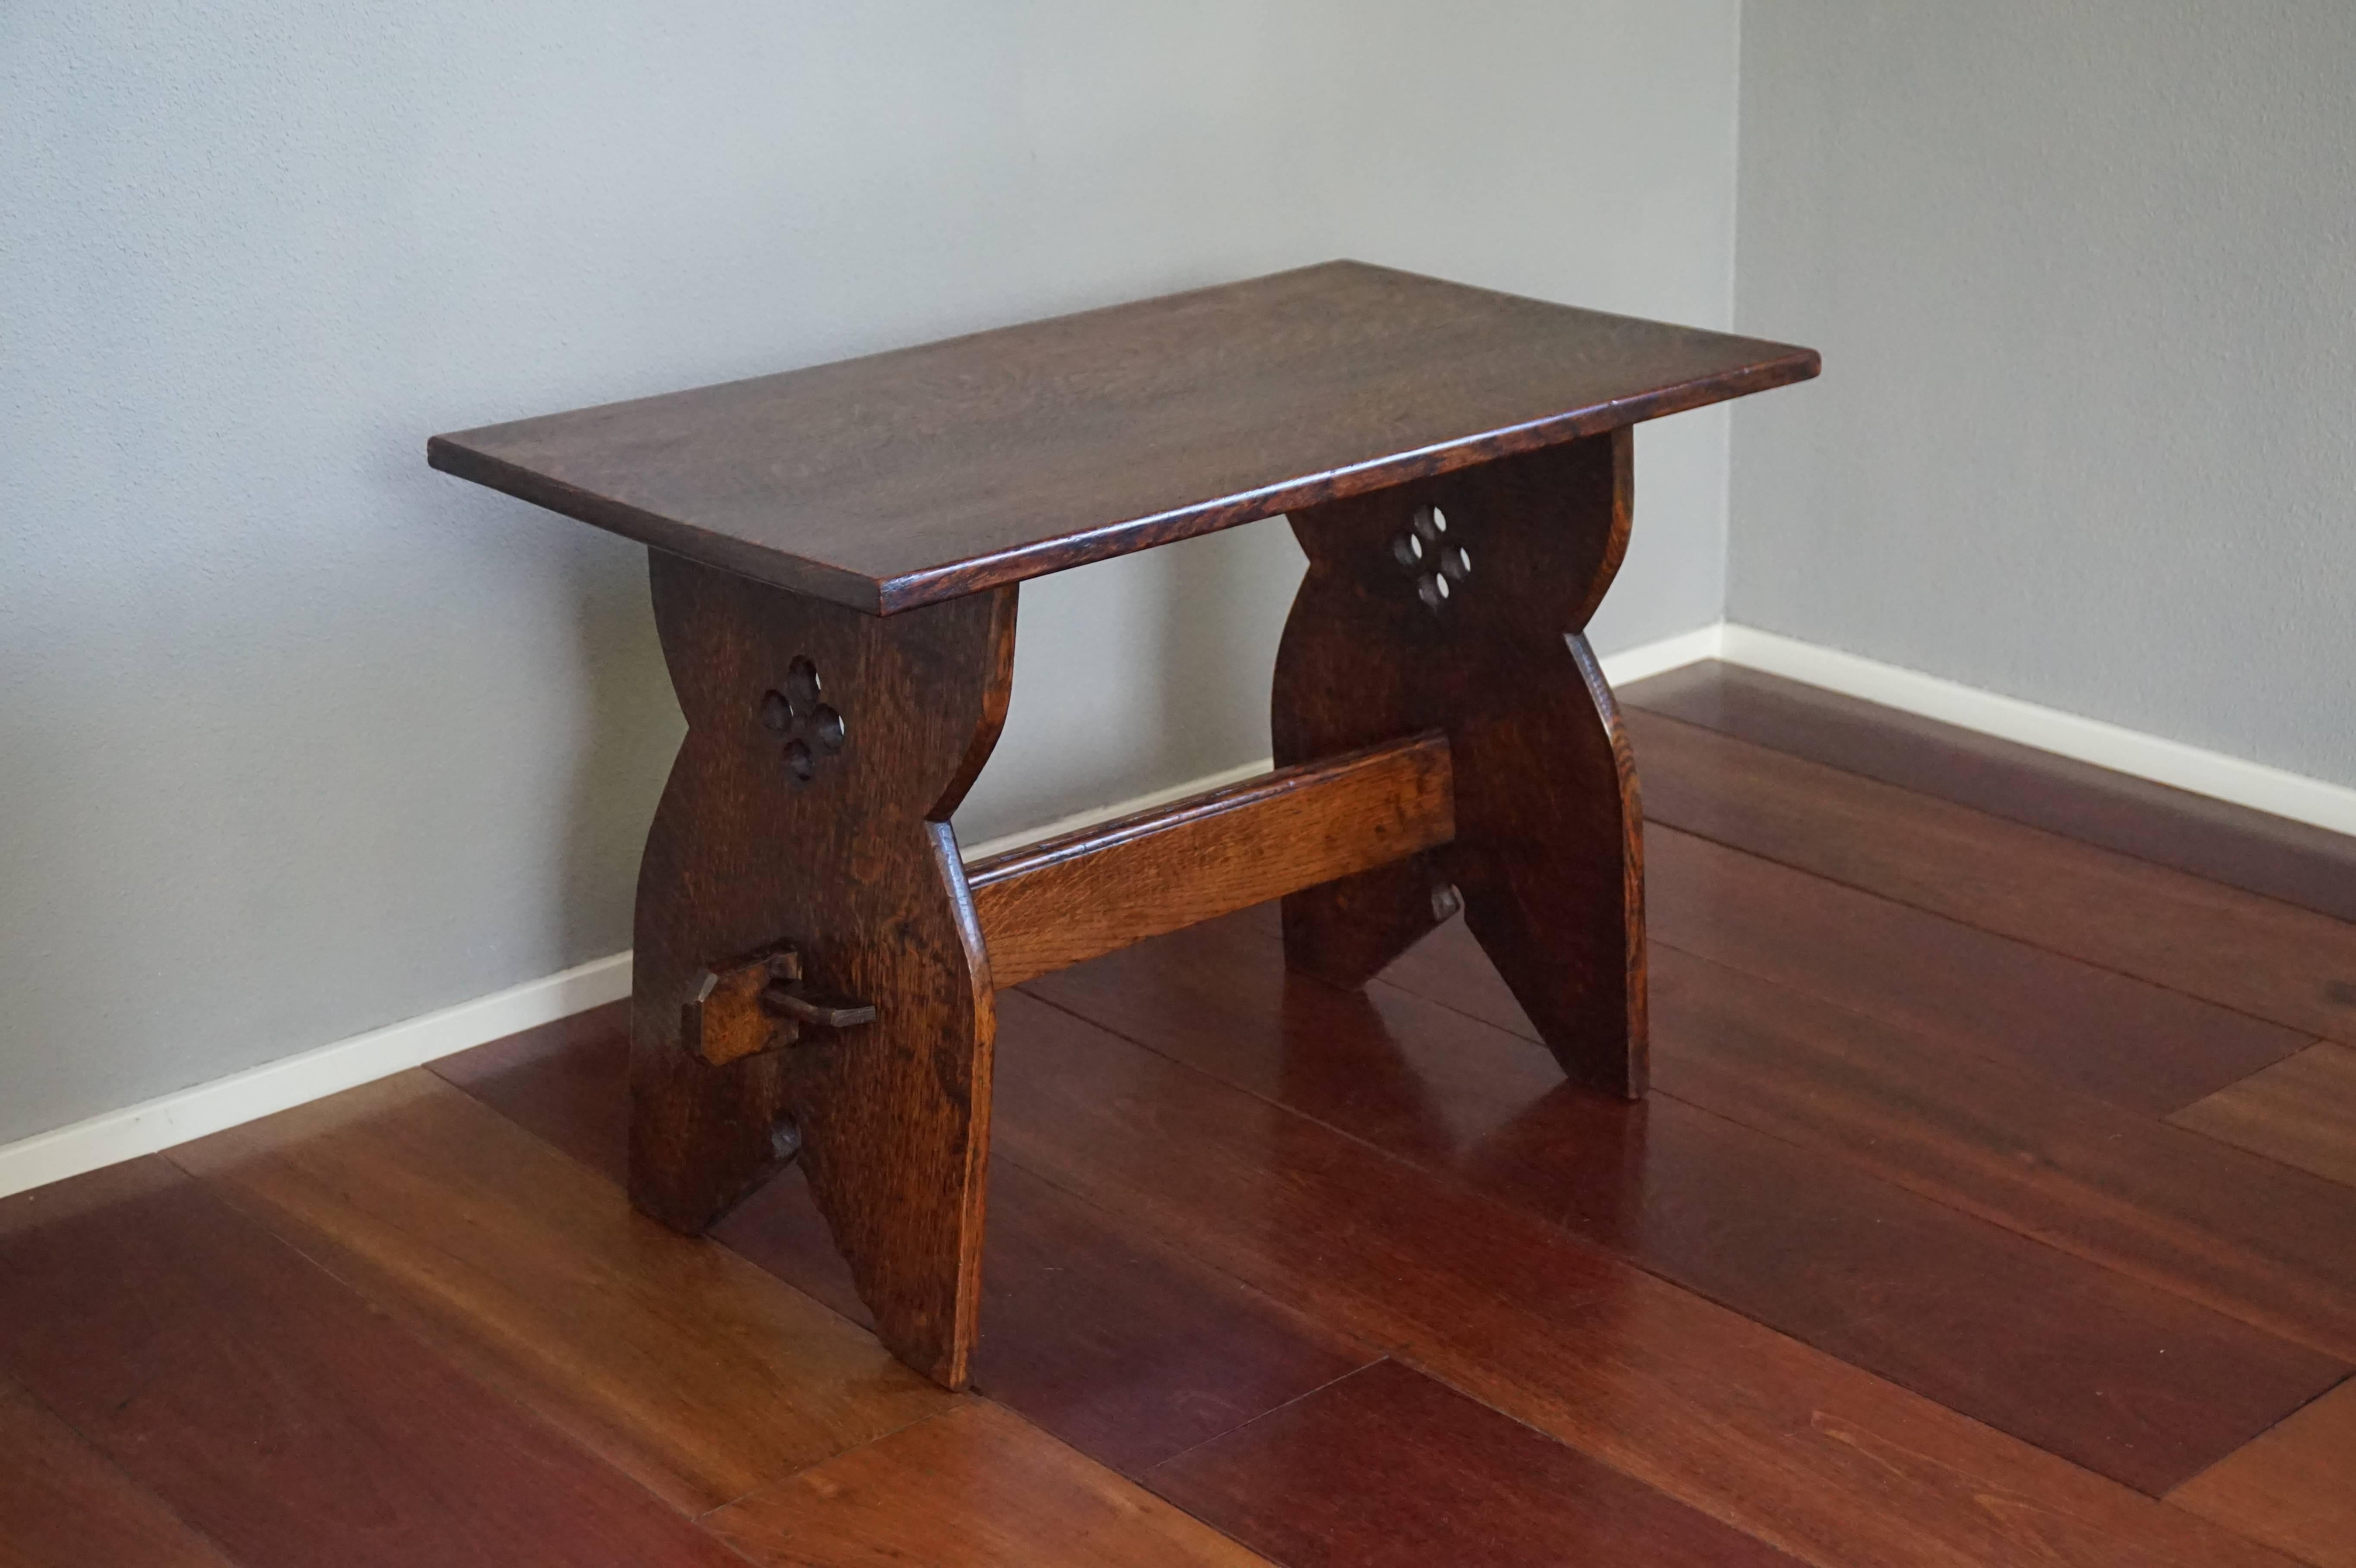 Stunning and practical size Arts and Crafts coffee table.

This stunning, multipurpose Arts and Crafts table has everything that one could wish for in a piece of furniture in this style. It has the perfect design with just enough, stylish